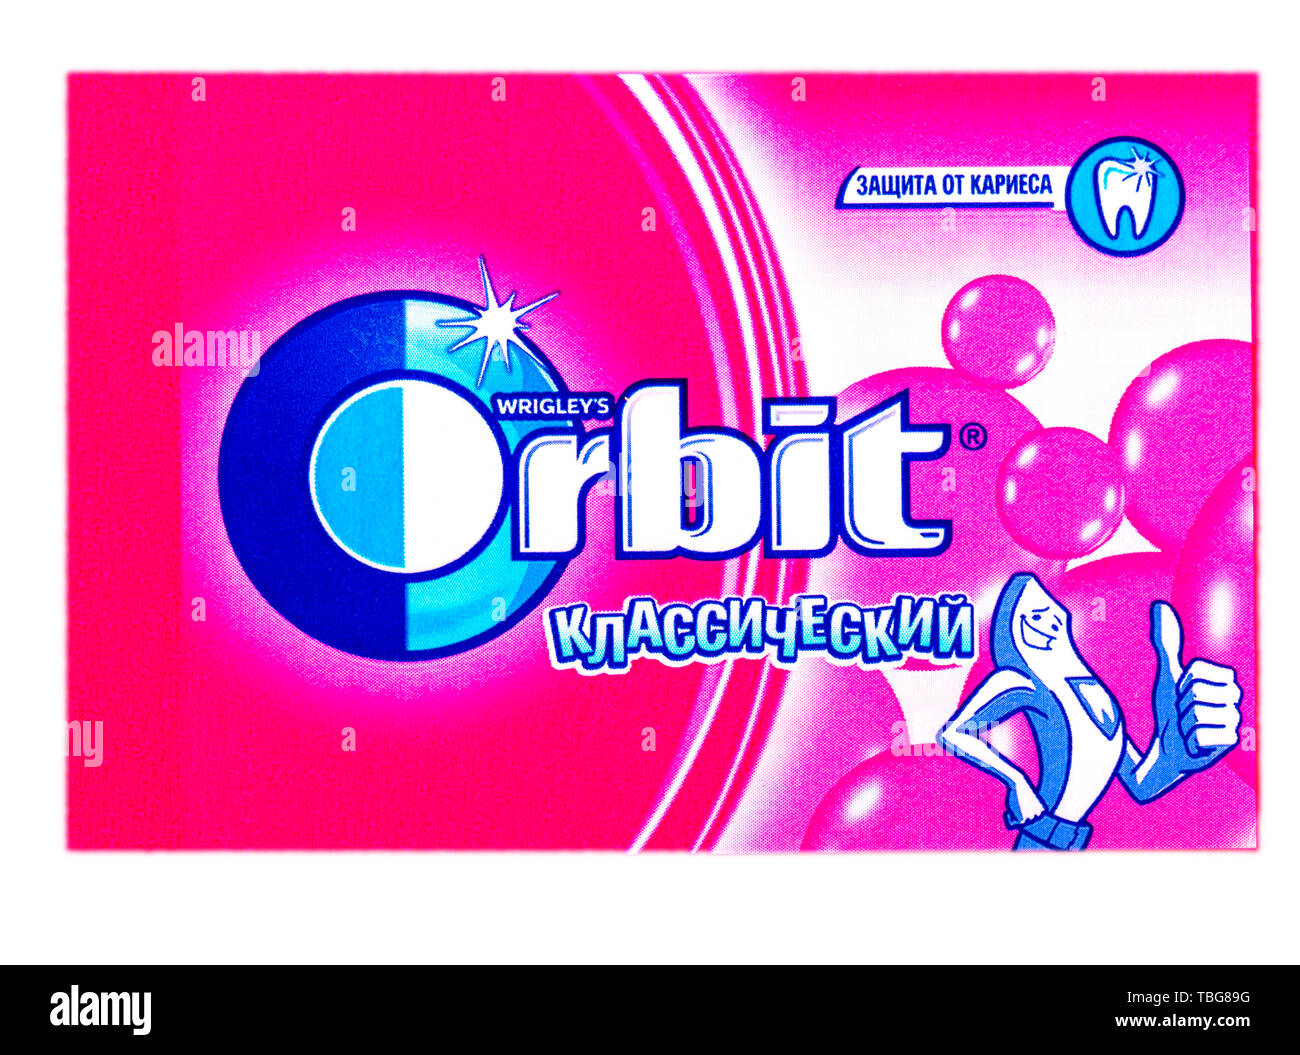 Chisinau, Moldova - SEPTENBER 15, 2017: Orbit Strong Mint chewing gum produced by Wrigley. Orbit is a brand of sugarless chewing gum that provides the Stock Photo